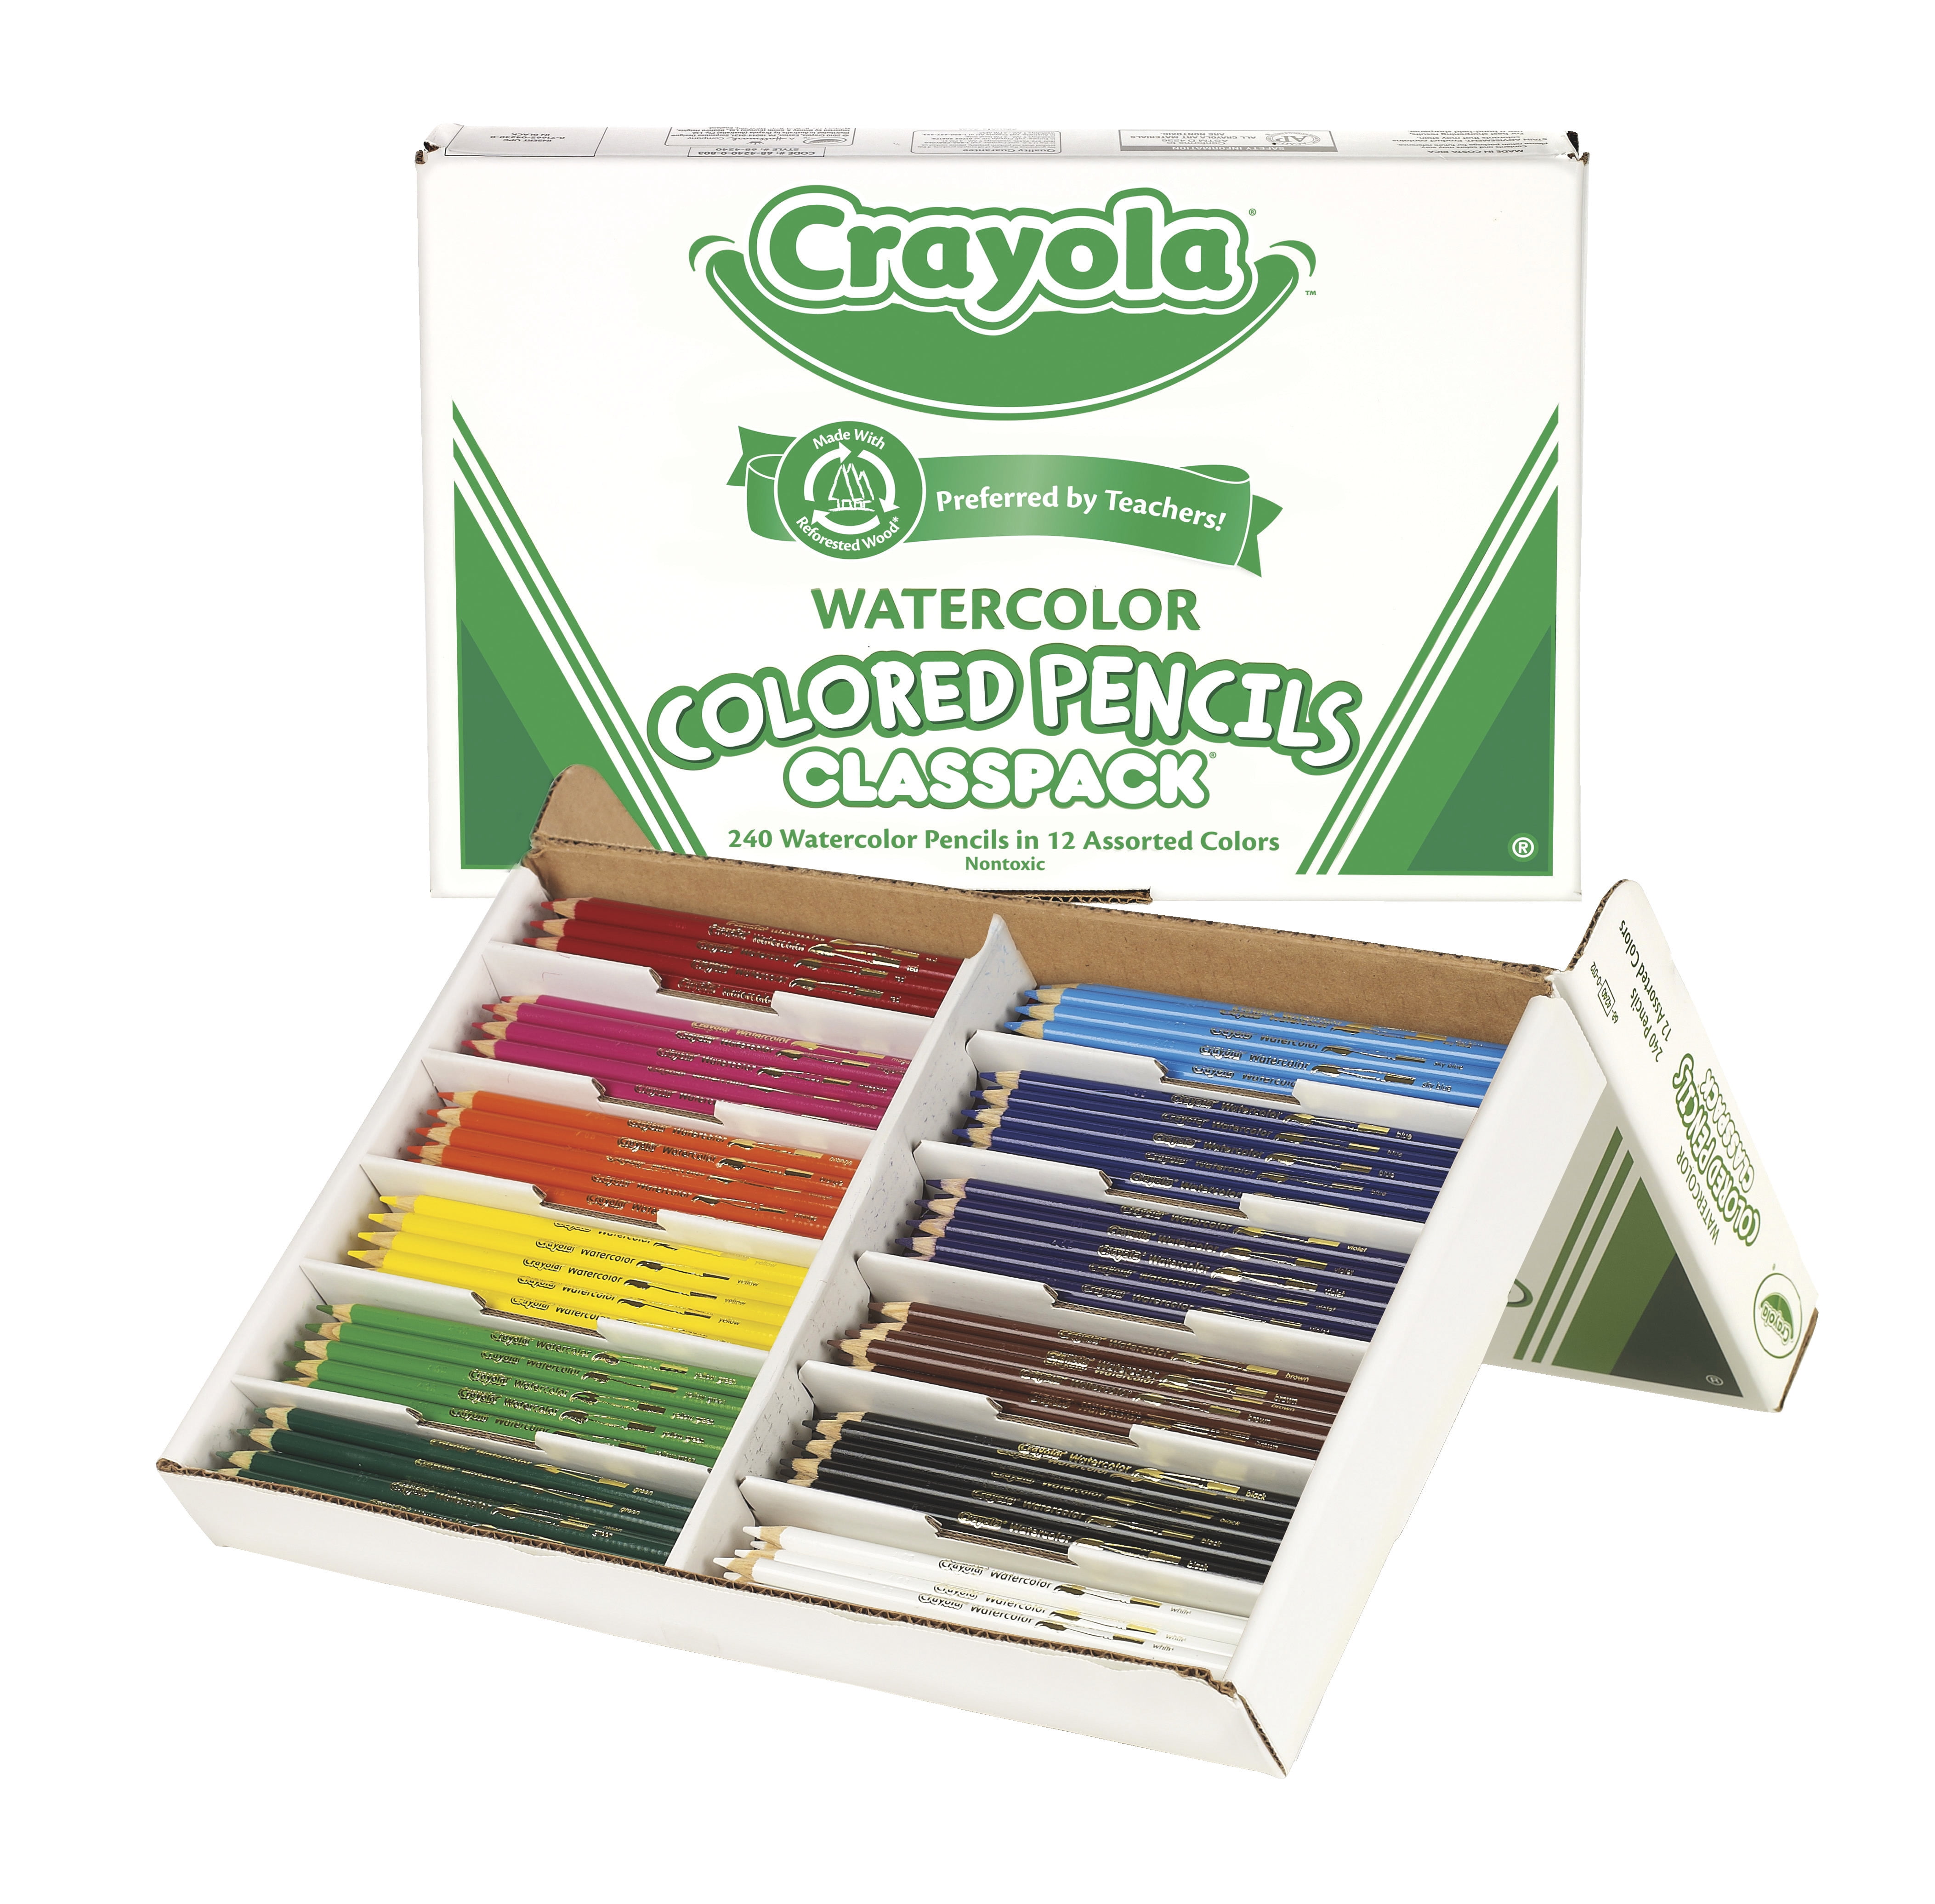 Crayola Watercolor Pencils 8/12/24 Nontoxic Metallic Lead Drawing  Educational Toys For Children 68-3708/68-4302 /68-4304 - Drawing Toys -  AliExpress